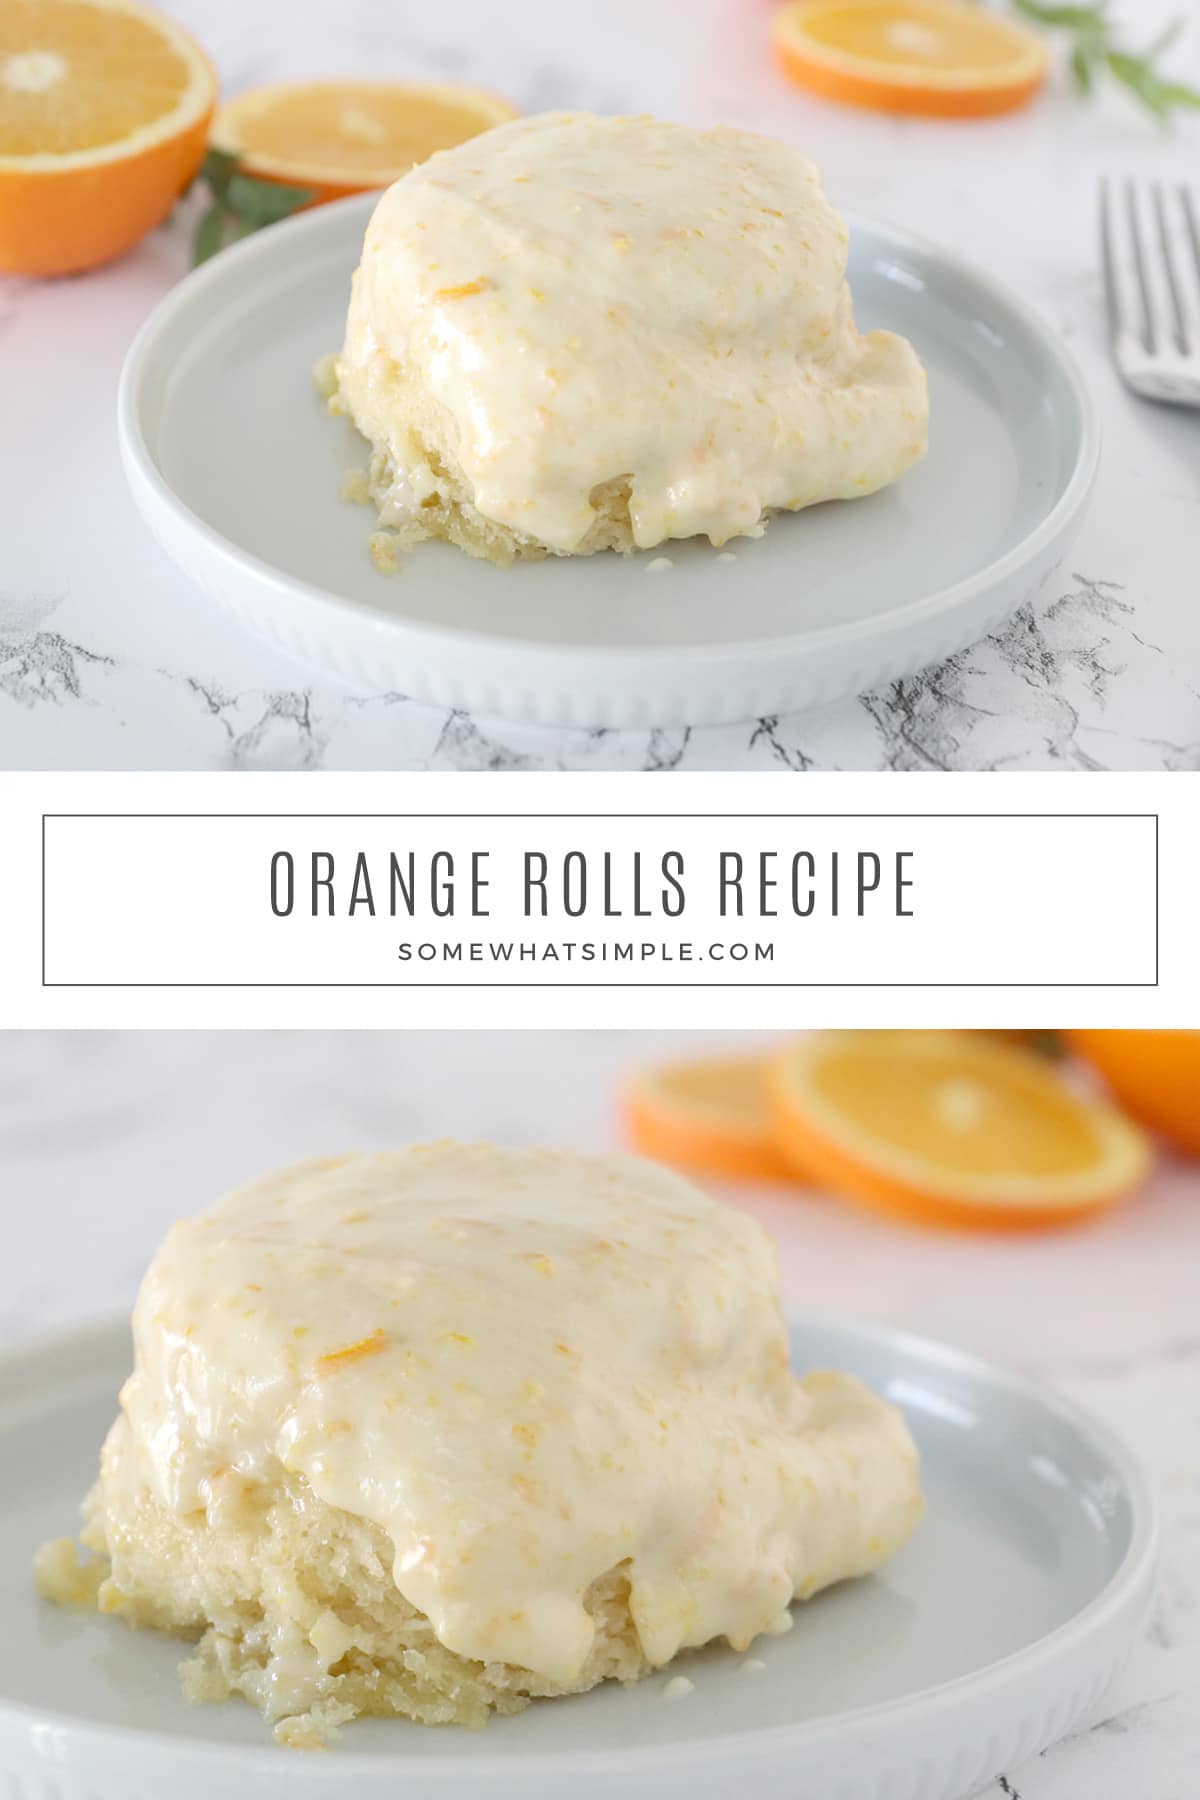 These Orange Rolls are easy to make and are the perfect dish to serve at a holiday brunch! They bake up into golden rolls that are soft, chewy, and totally delicious! via @somewhatsimple